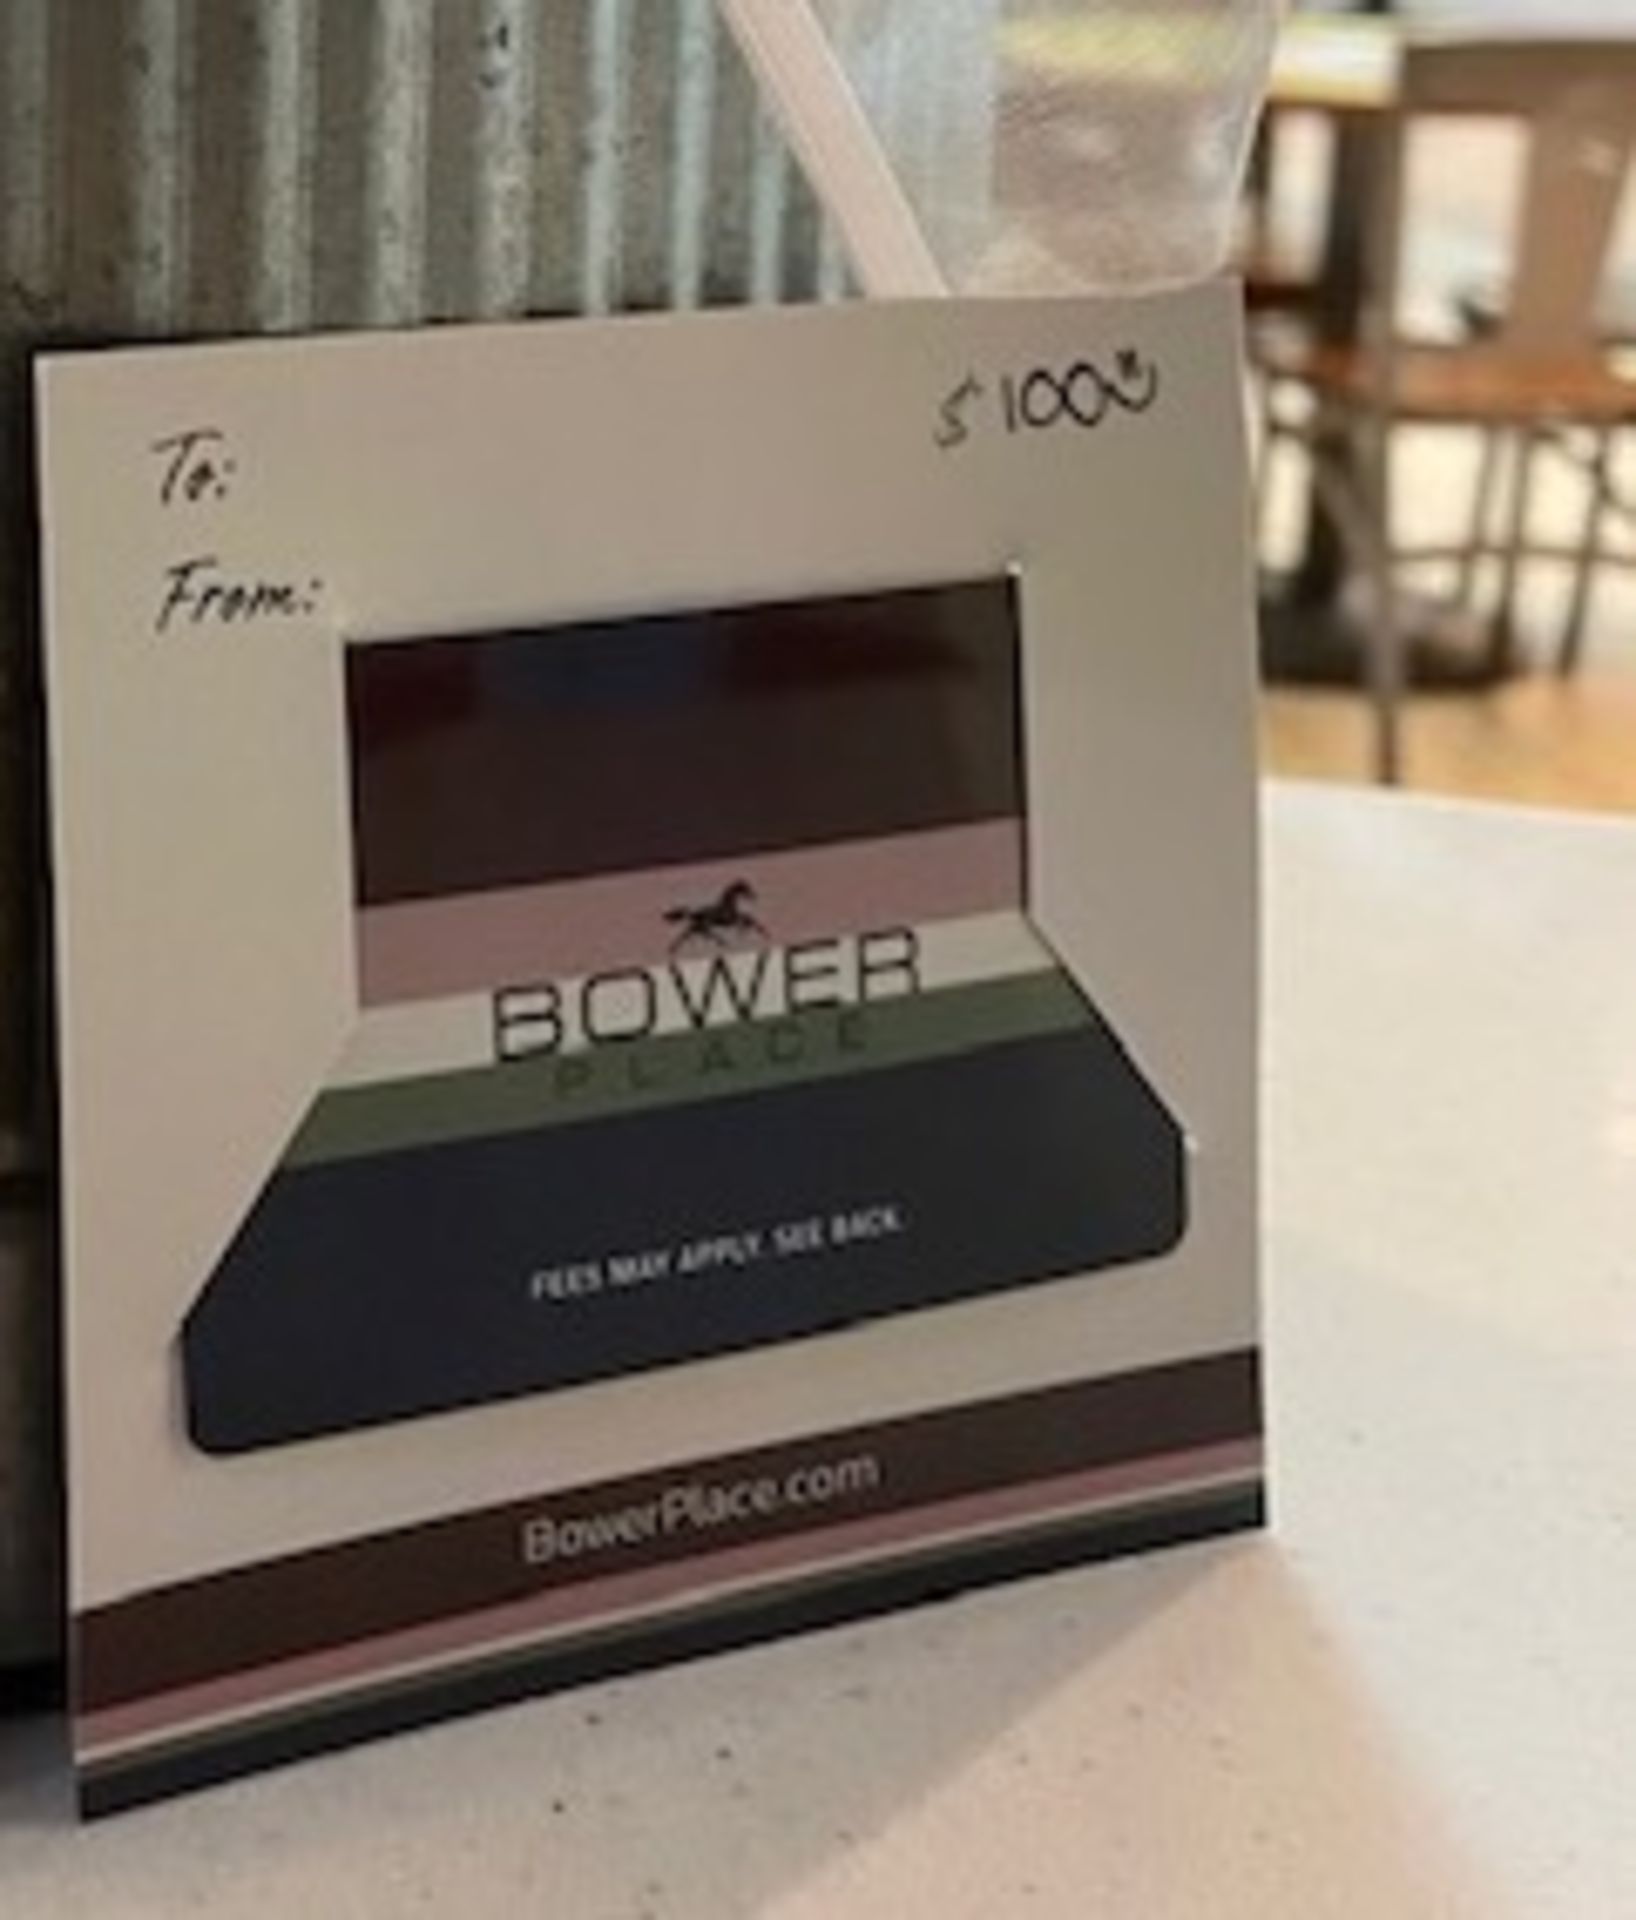 $100 Gift Certificate From Bower Place